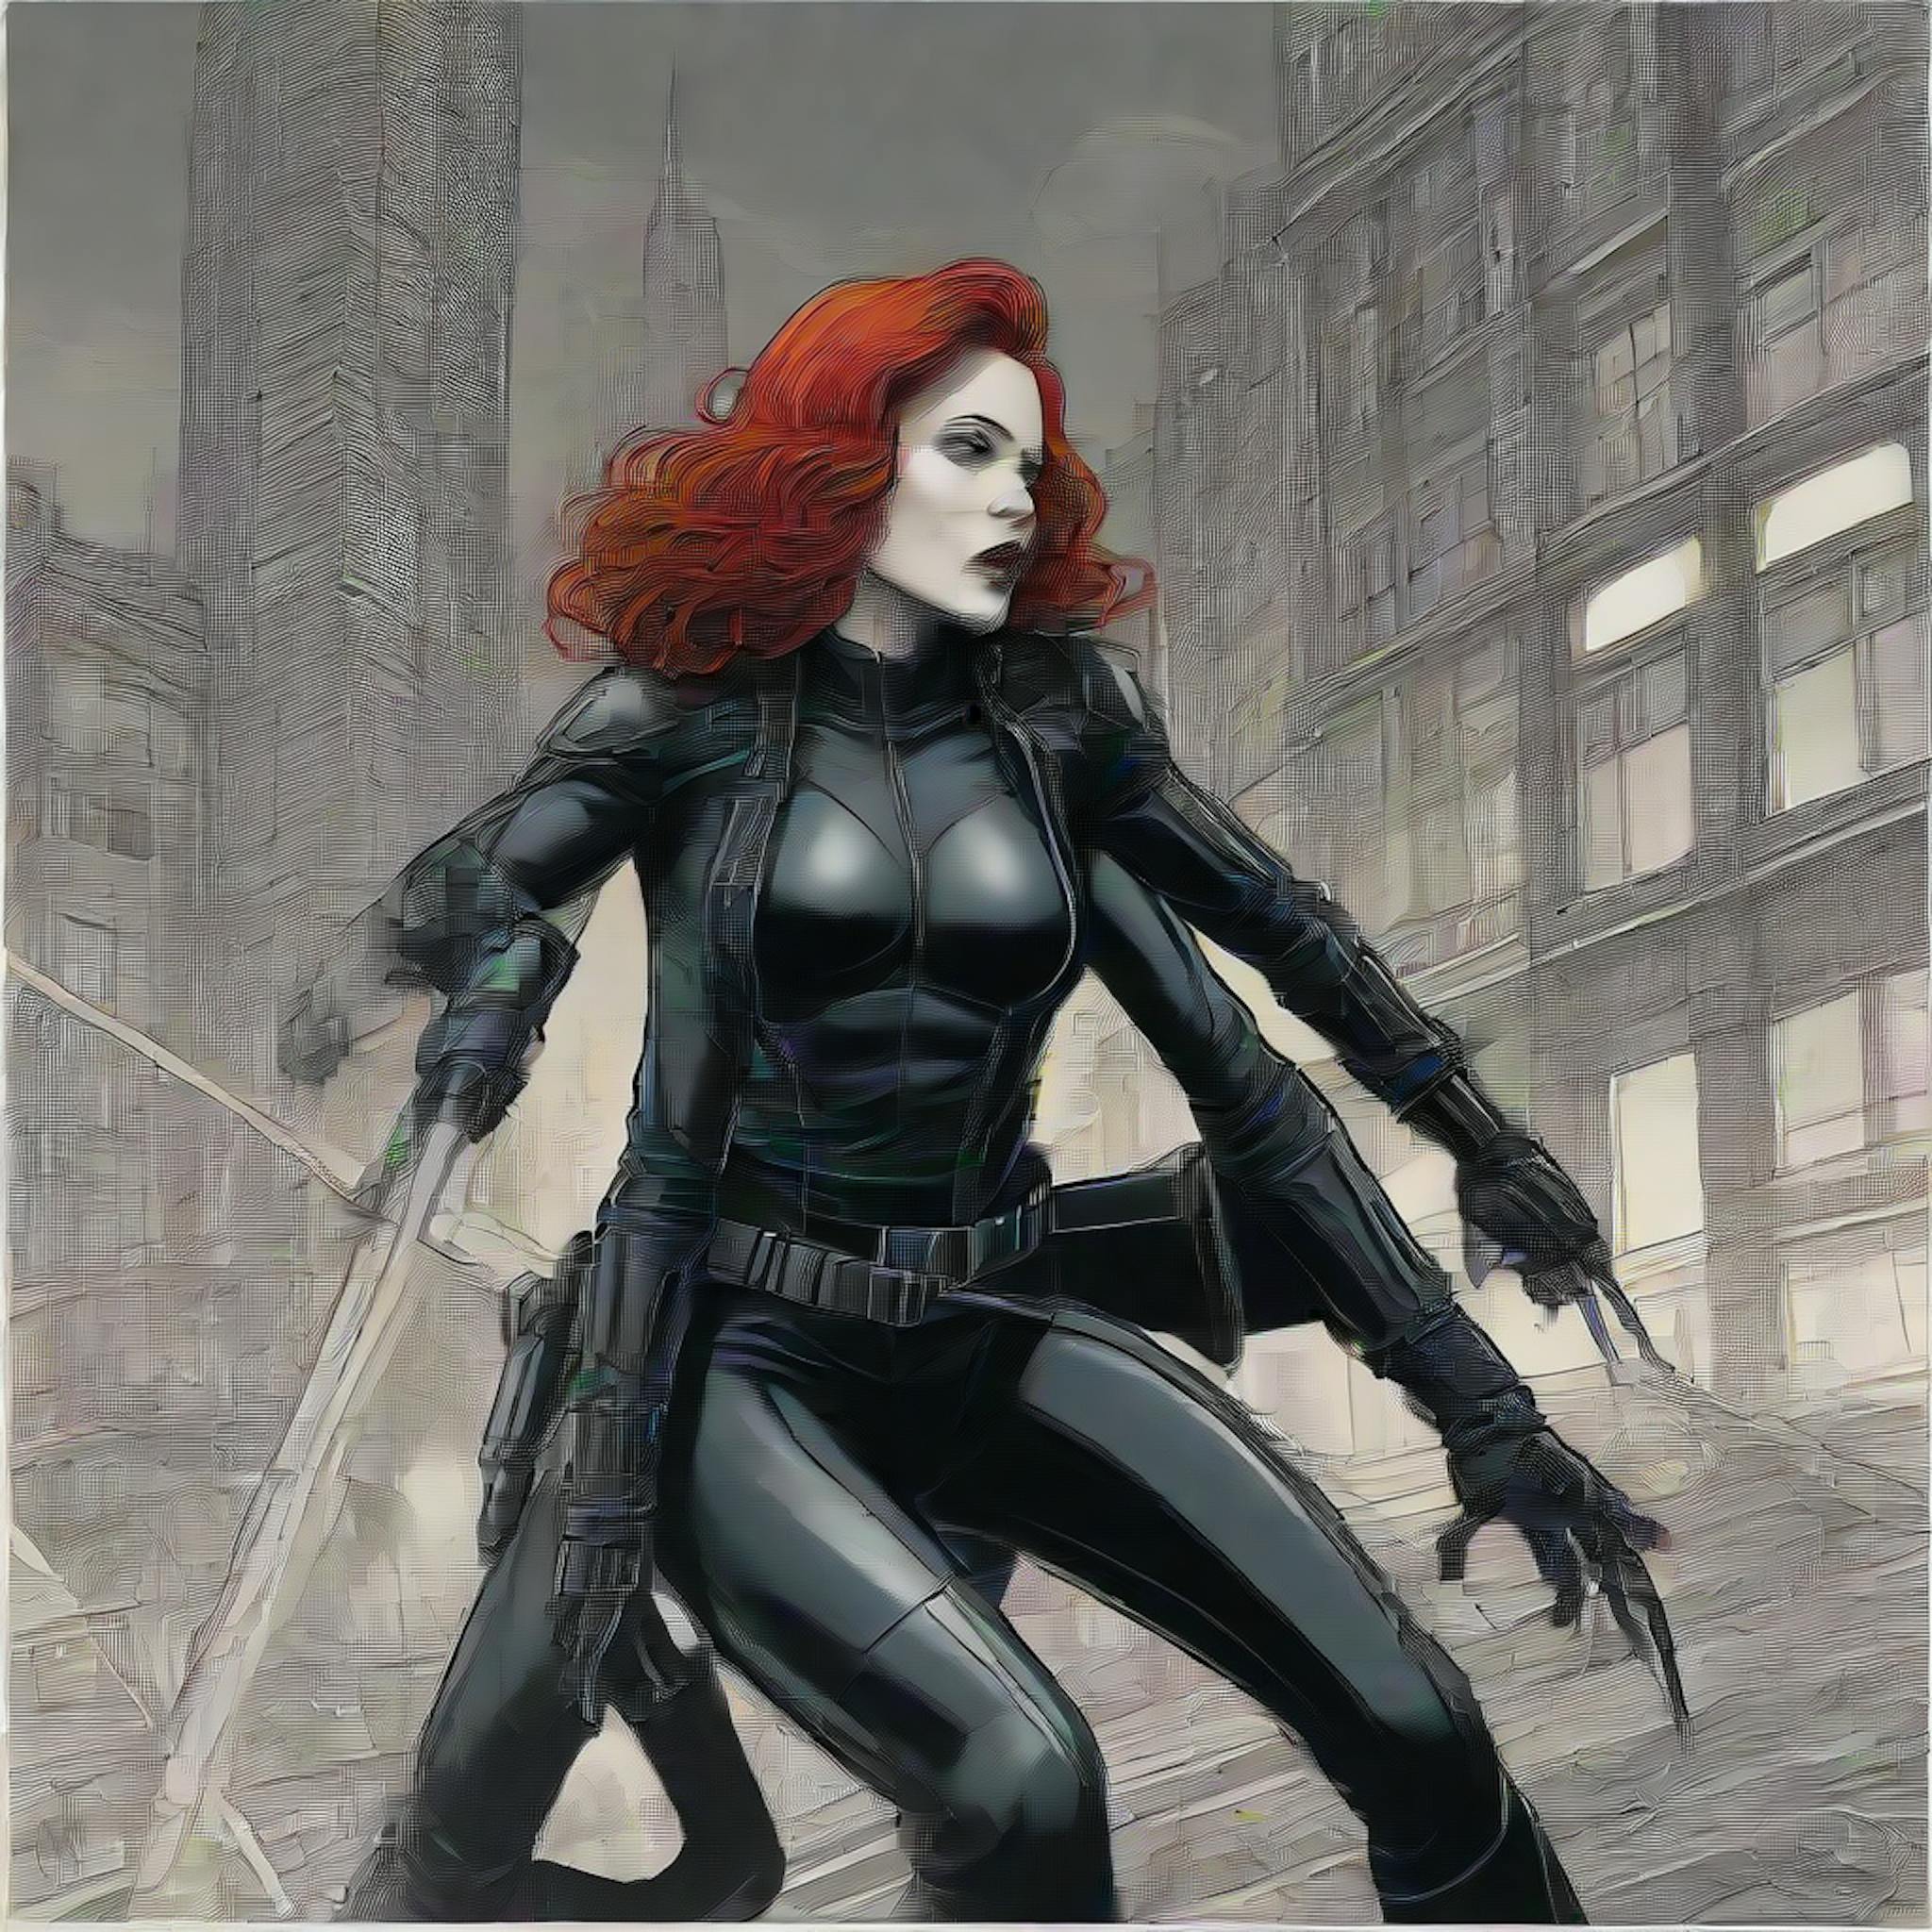 featured image - Scarlett Johansson's Iconic Role as Black Widow in the MCU